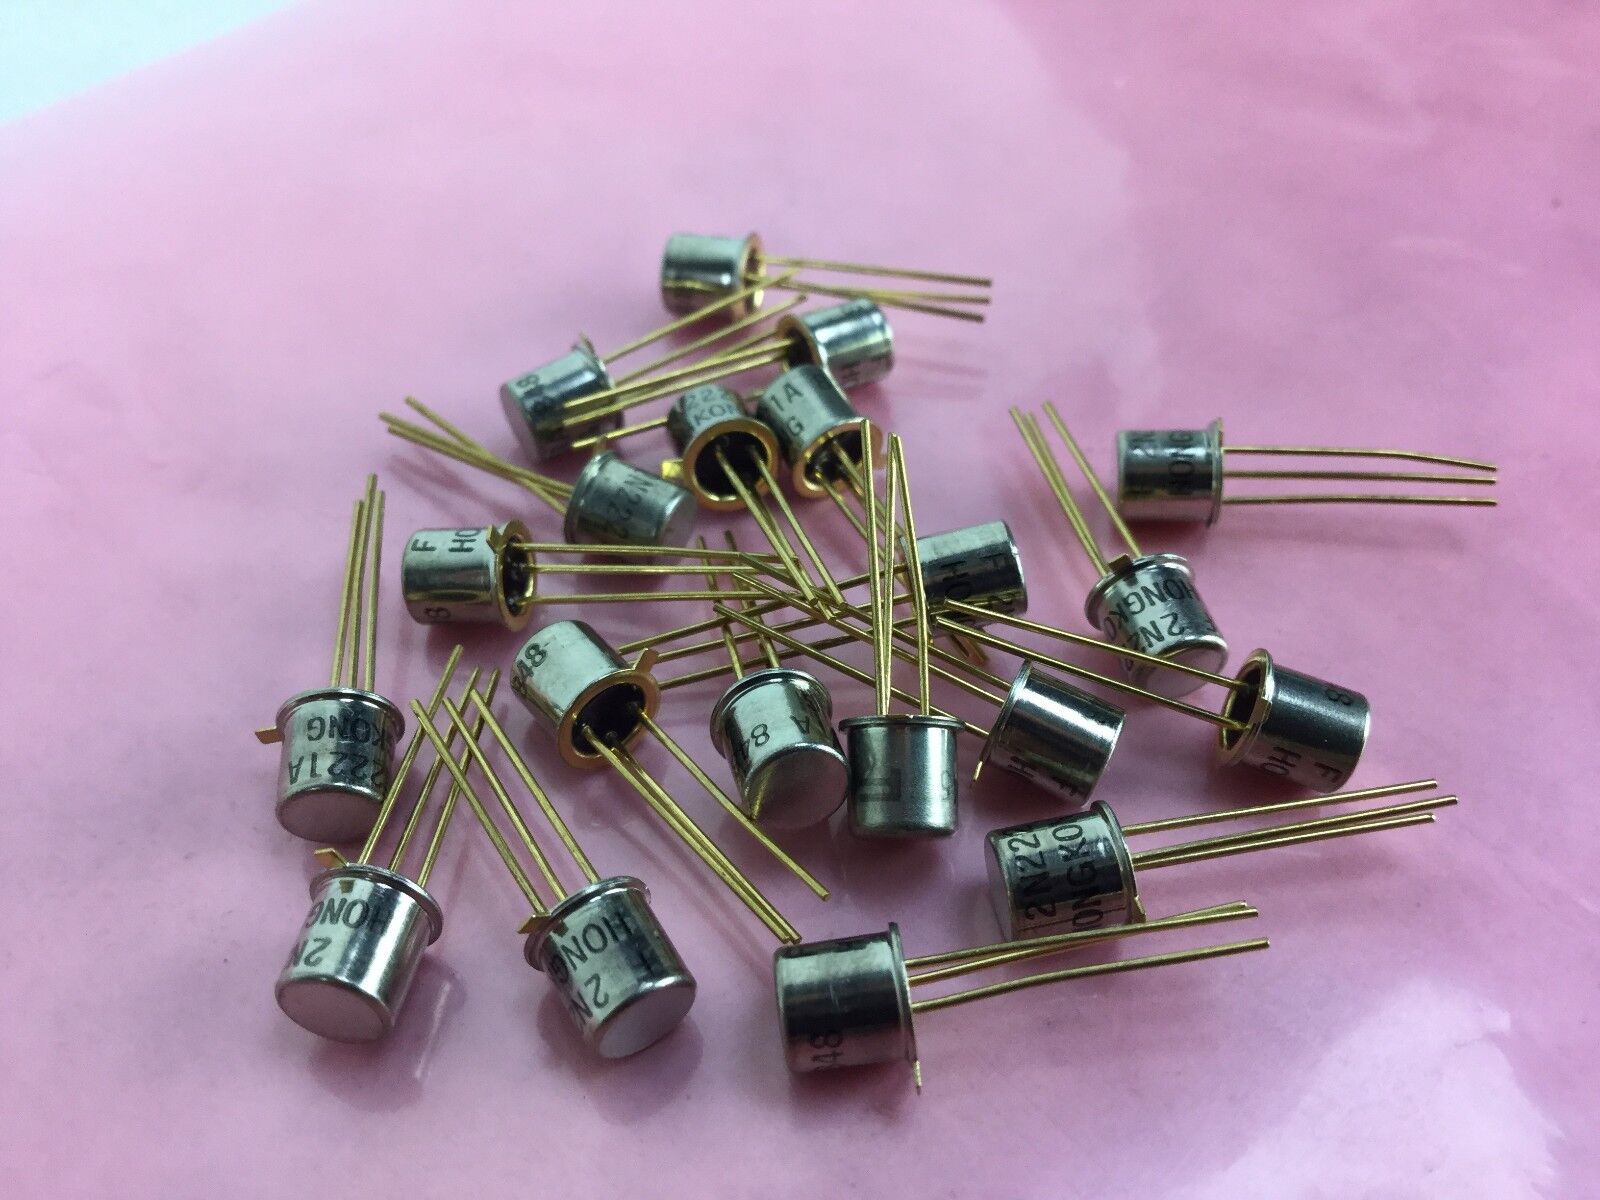 NEW Fairchild 2N2221A Bipolar Transistors - BJT, TO-18, Lot of 20